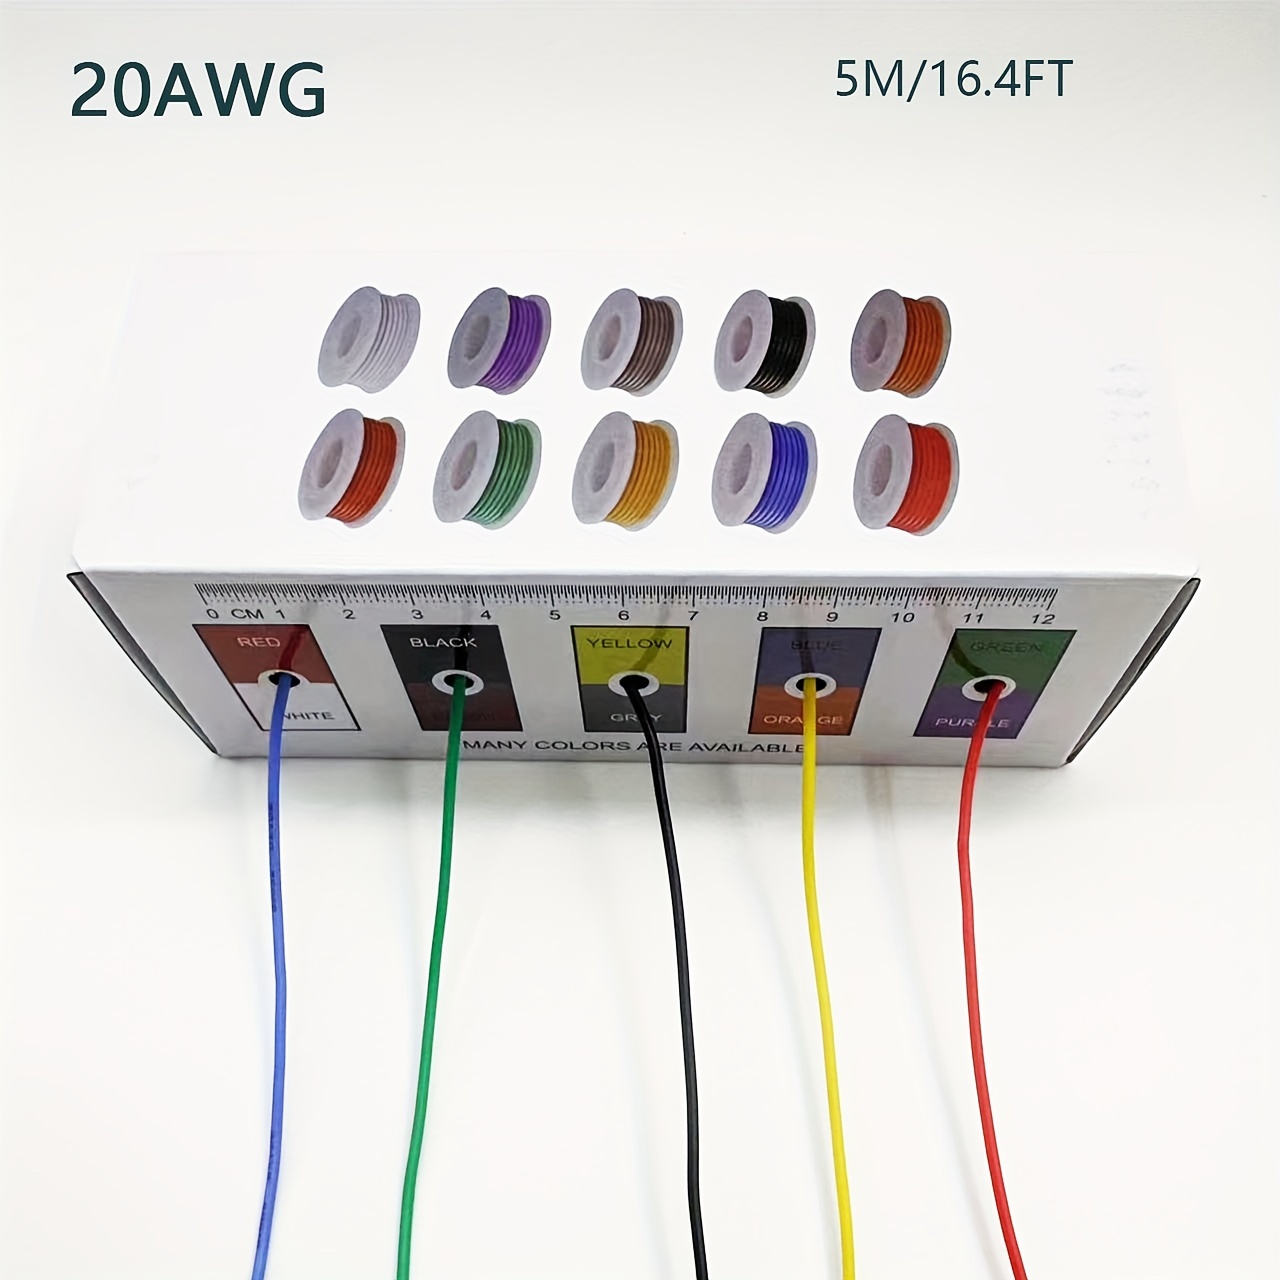 Super Thin 18 AWG Single Strand Wire Spool, Choice of Color (46665B)